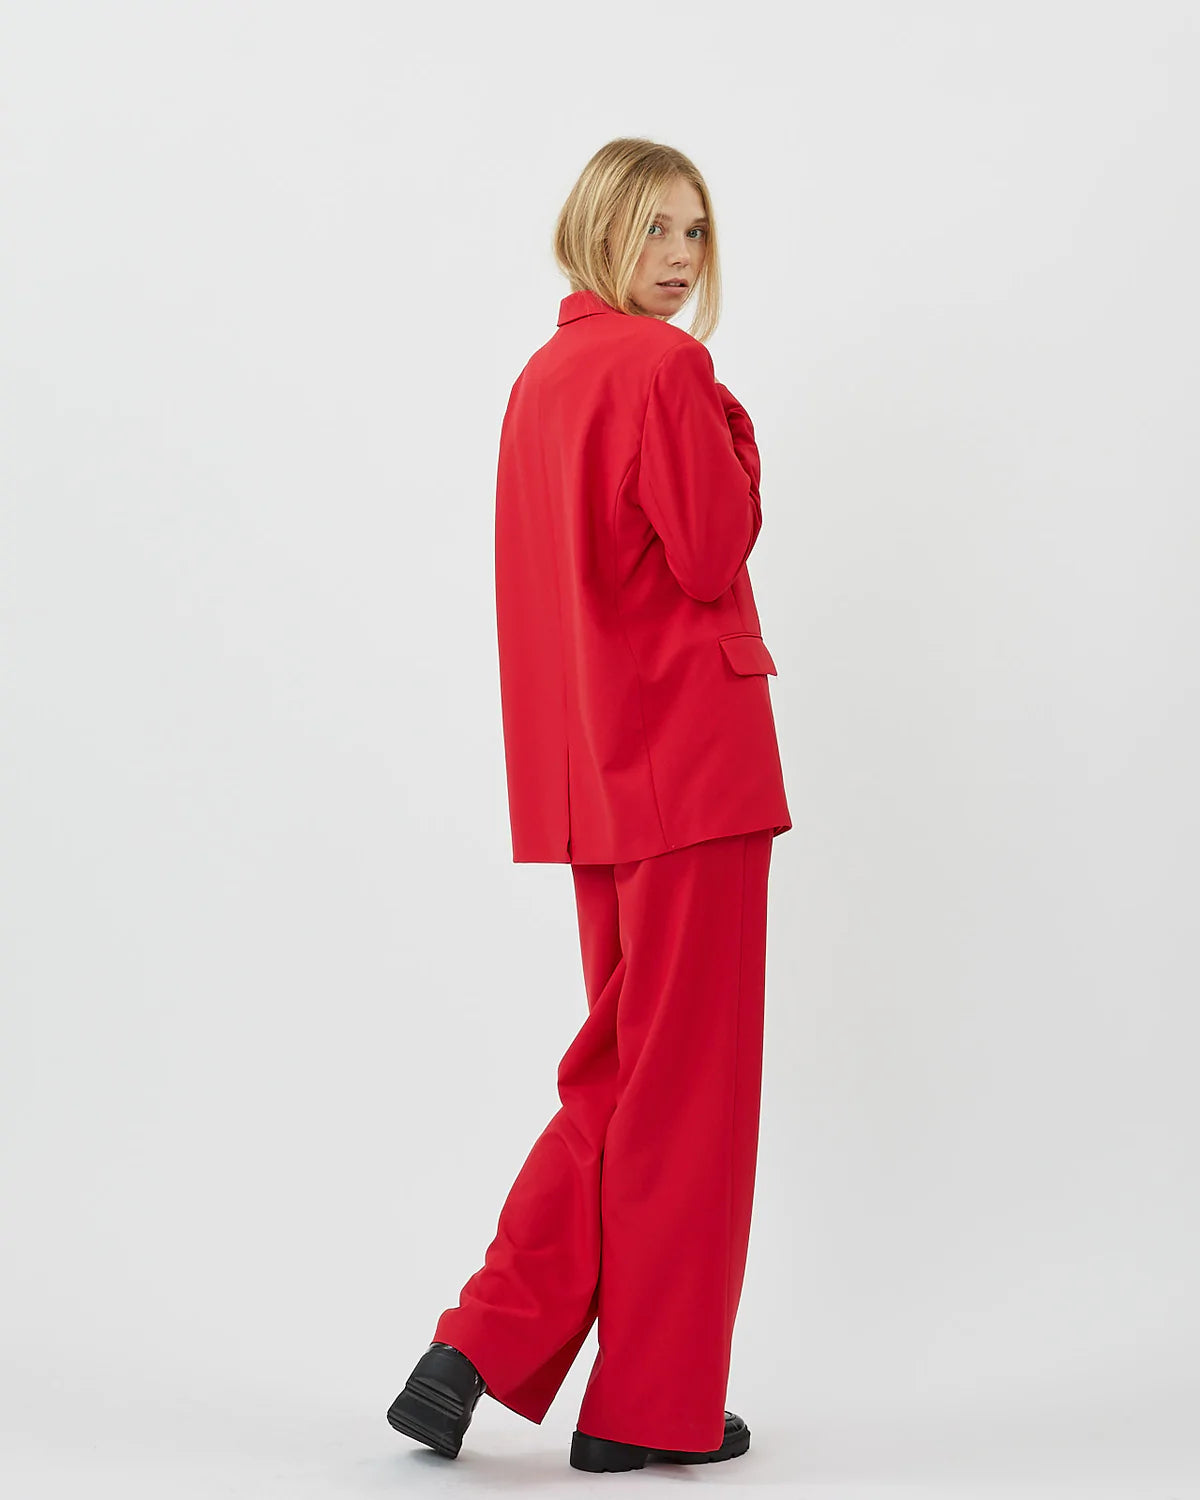 Lessa Pant in Jalepeño Red